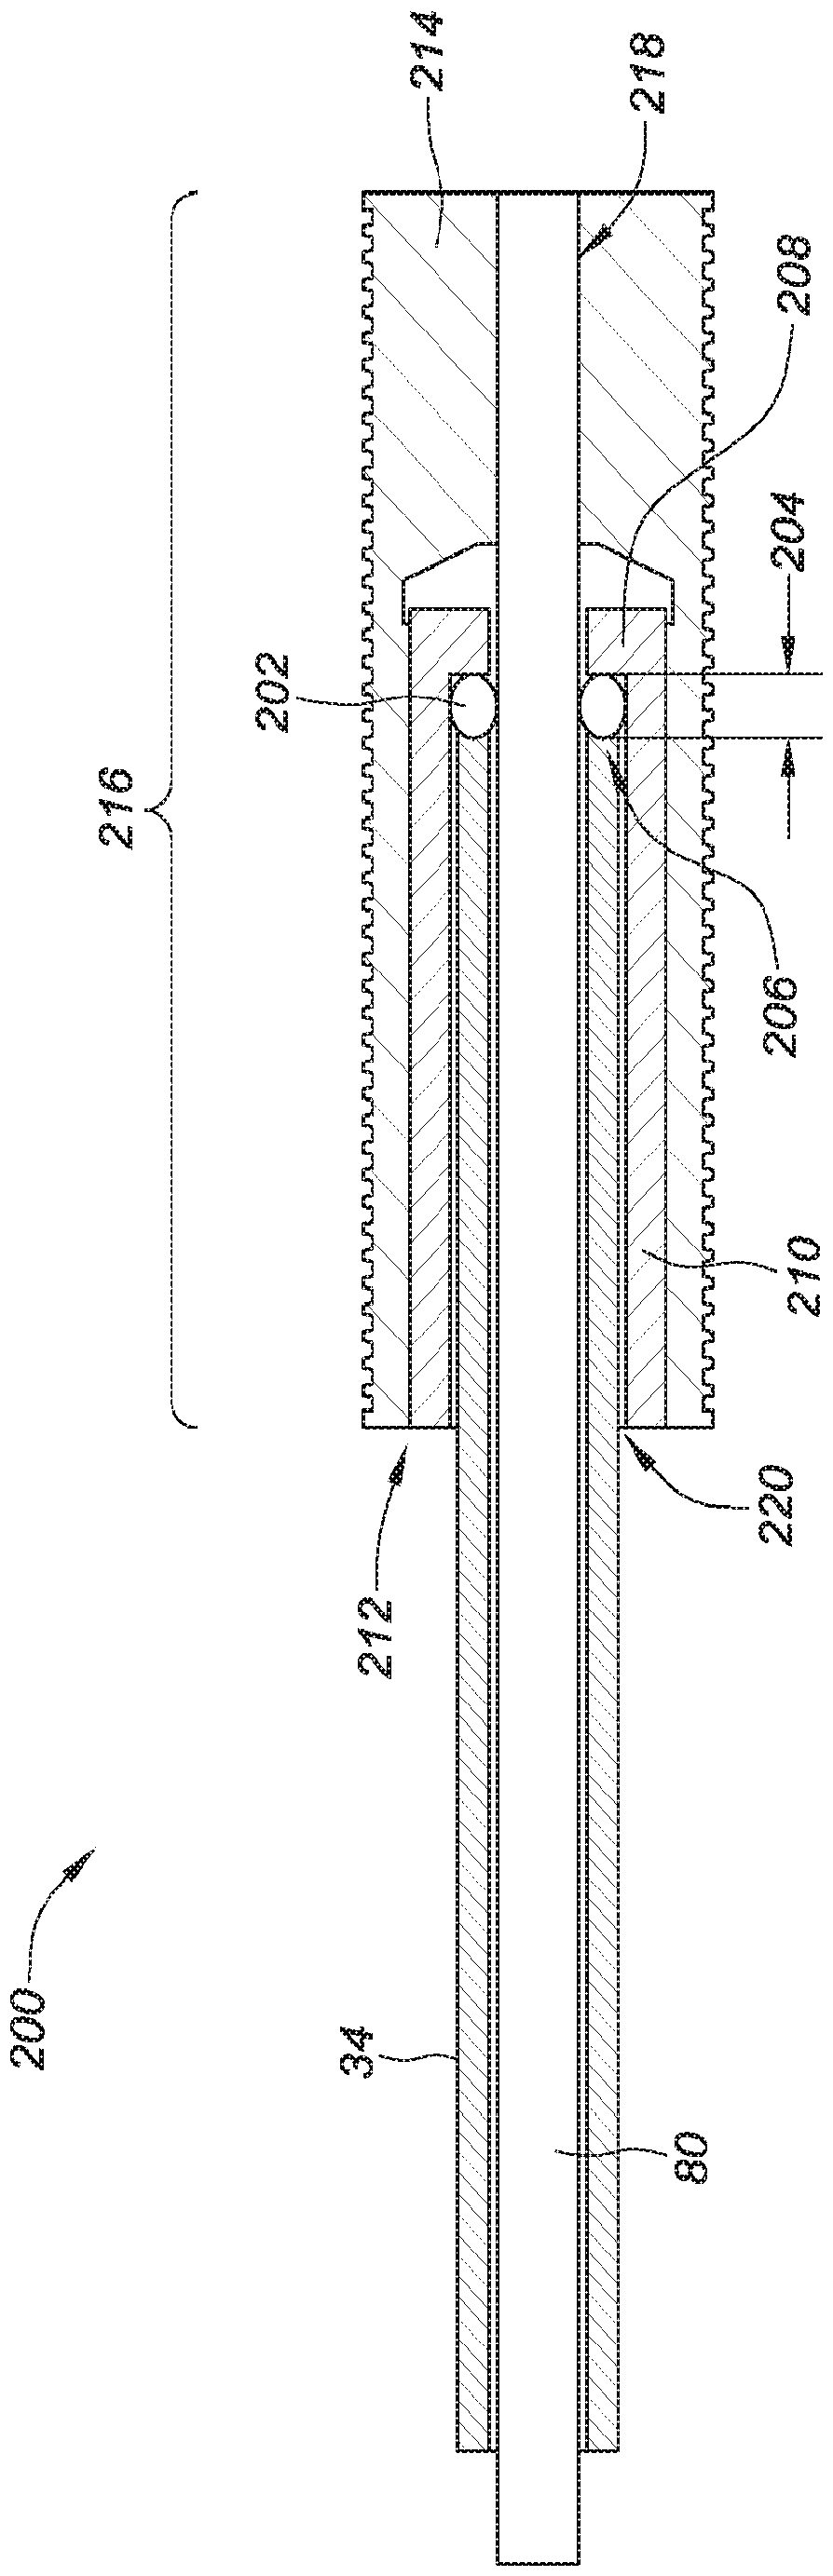 Systems, devices, and methods for retrieval systems having a tether